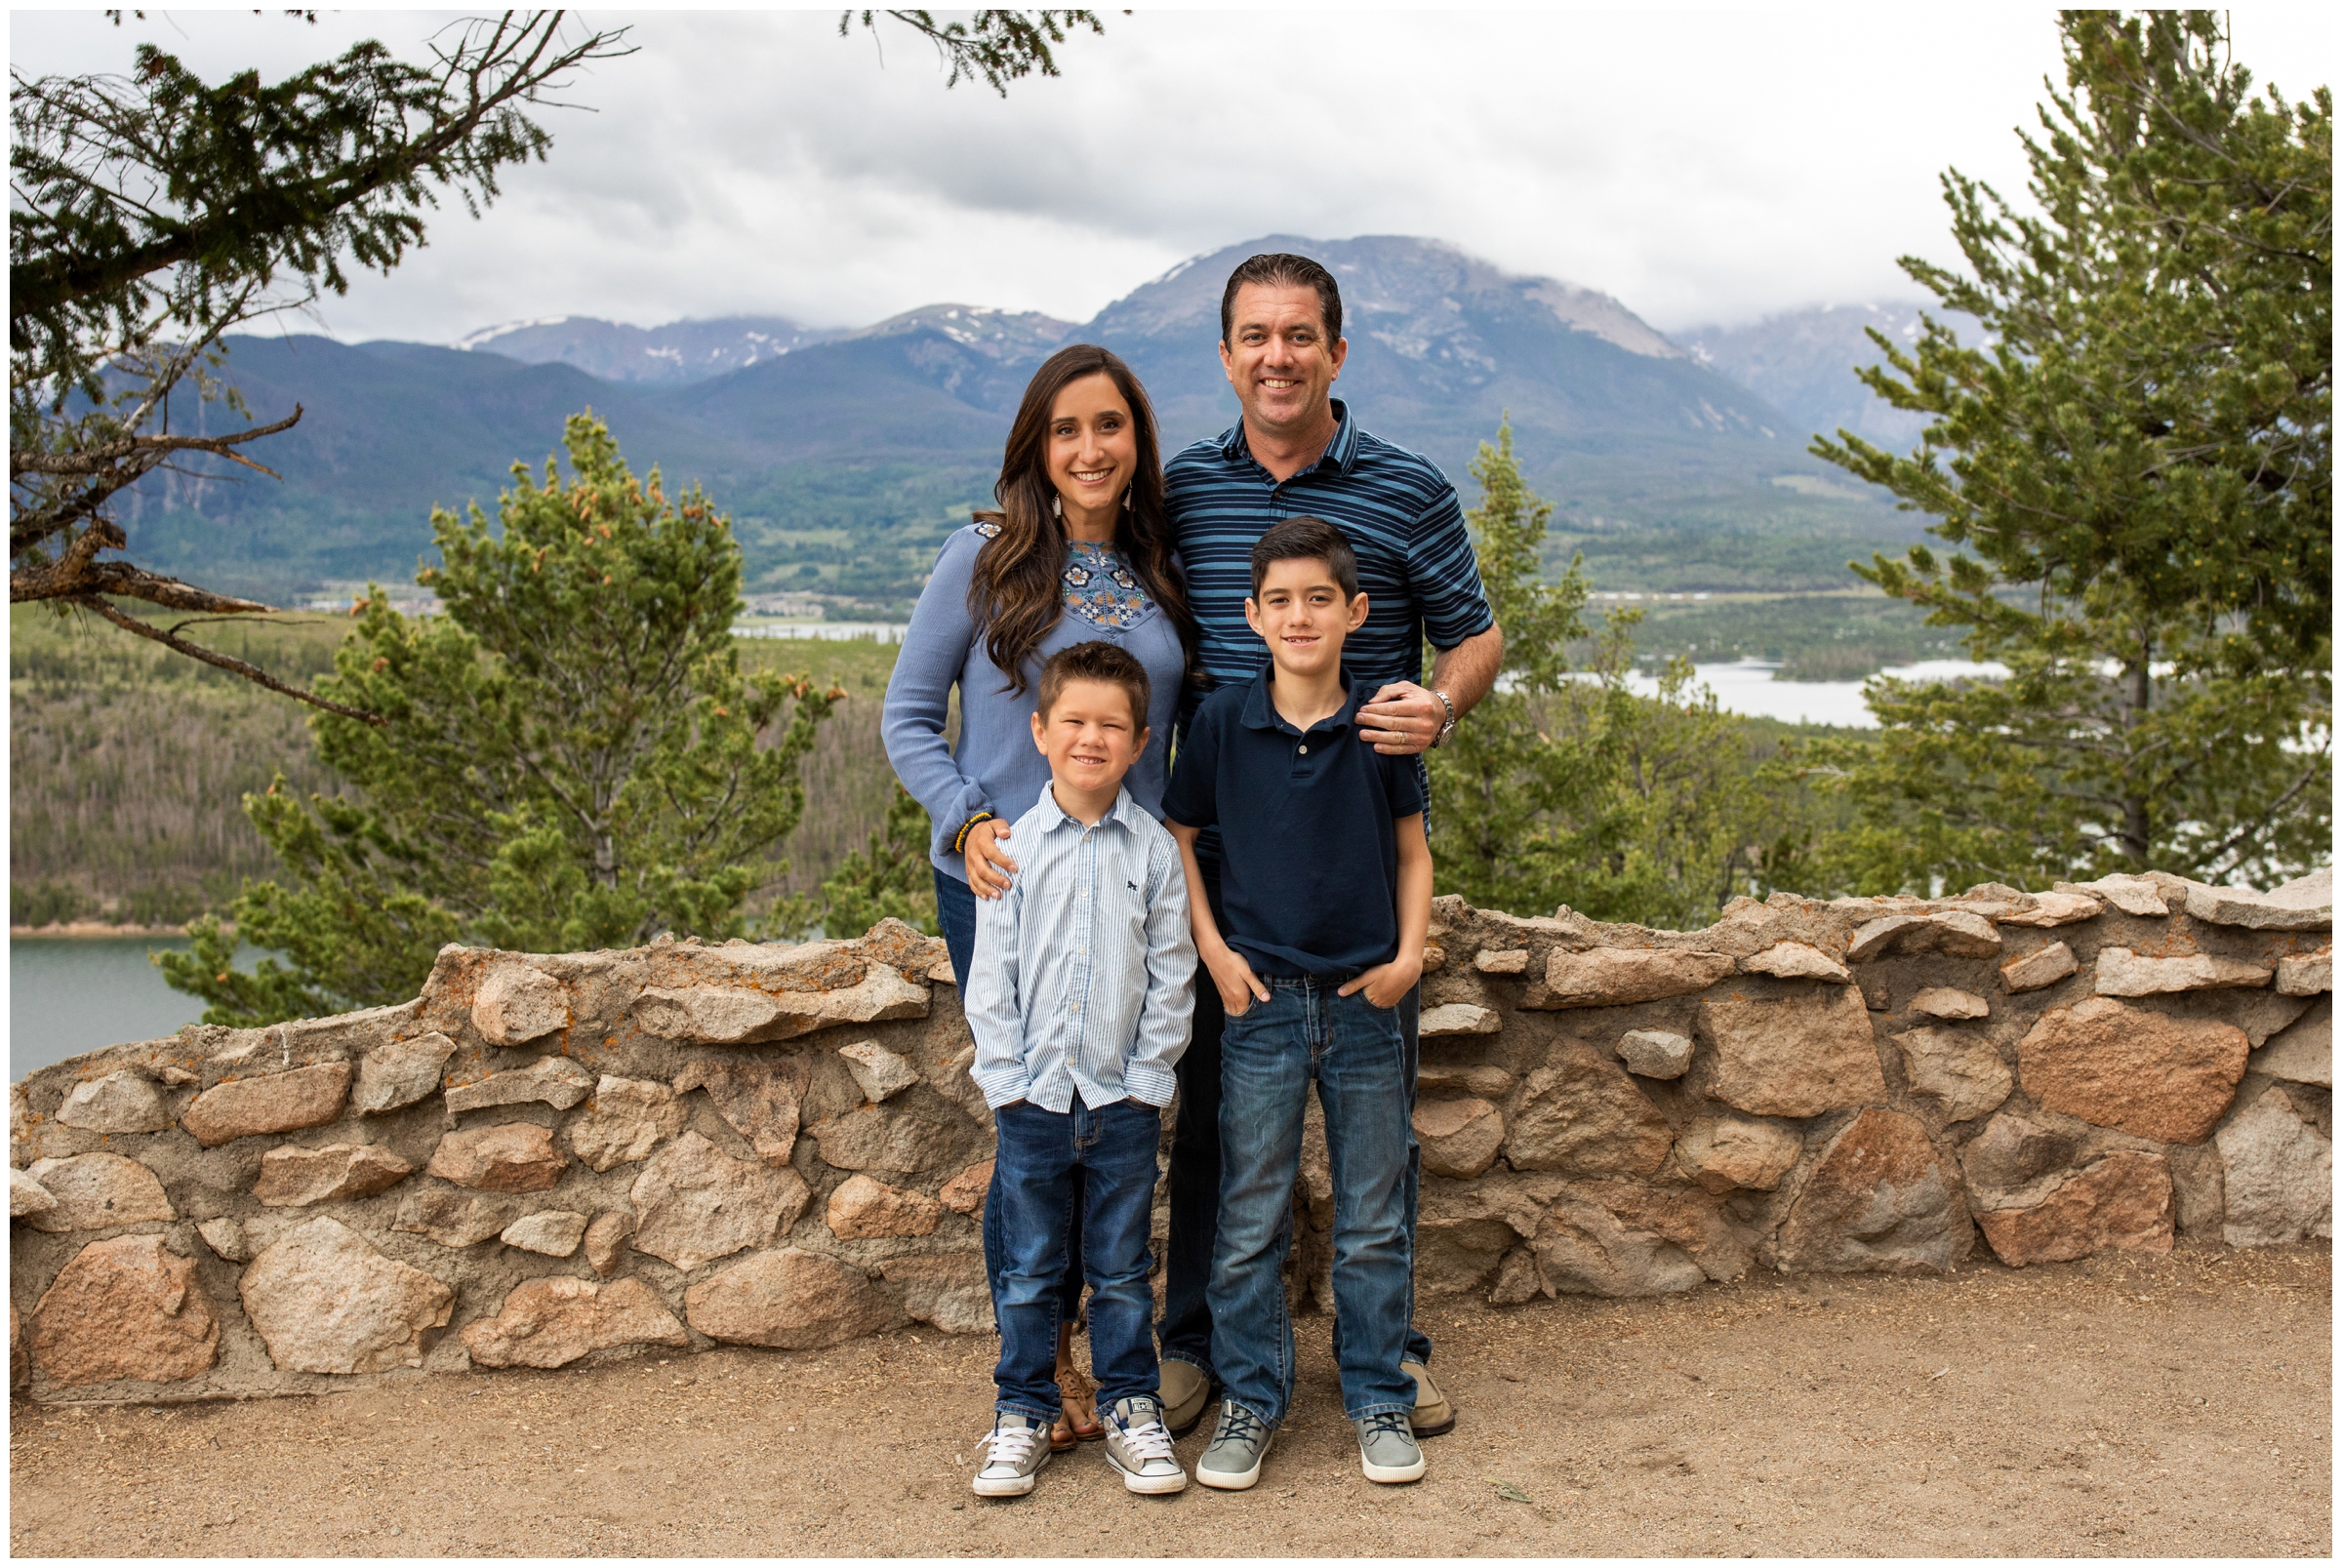 Sapphire Point Overlook Colorado family photography session during summer